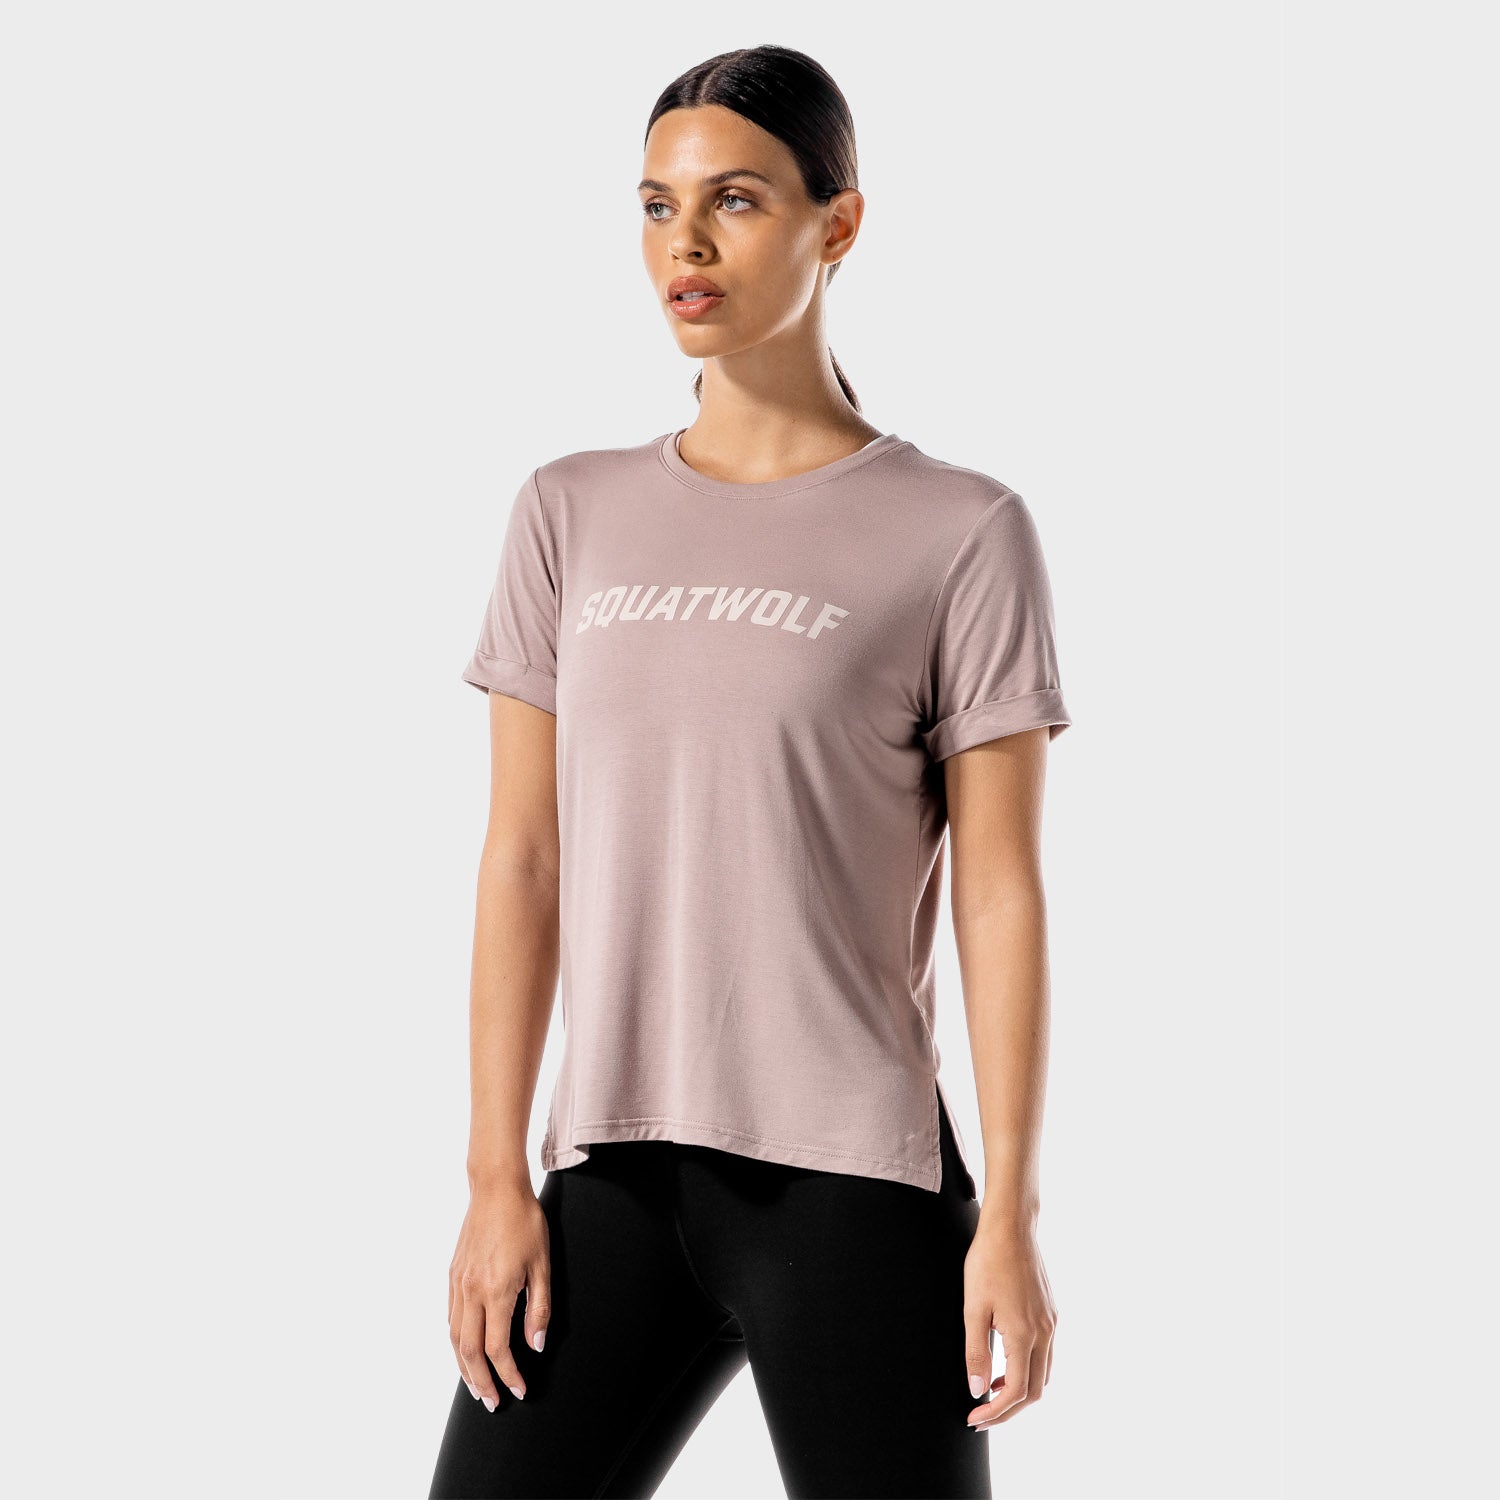 MR, Iconic Tee - Taupe, Workout Shirts Women